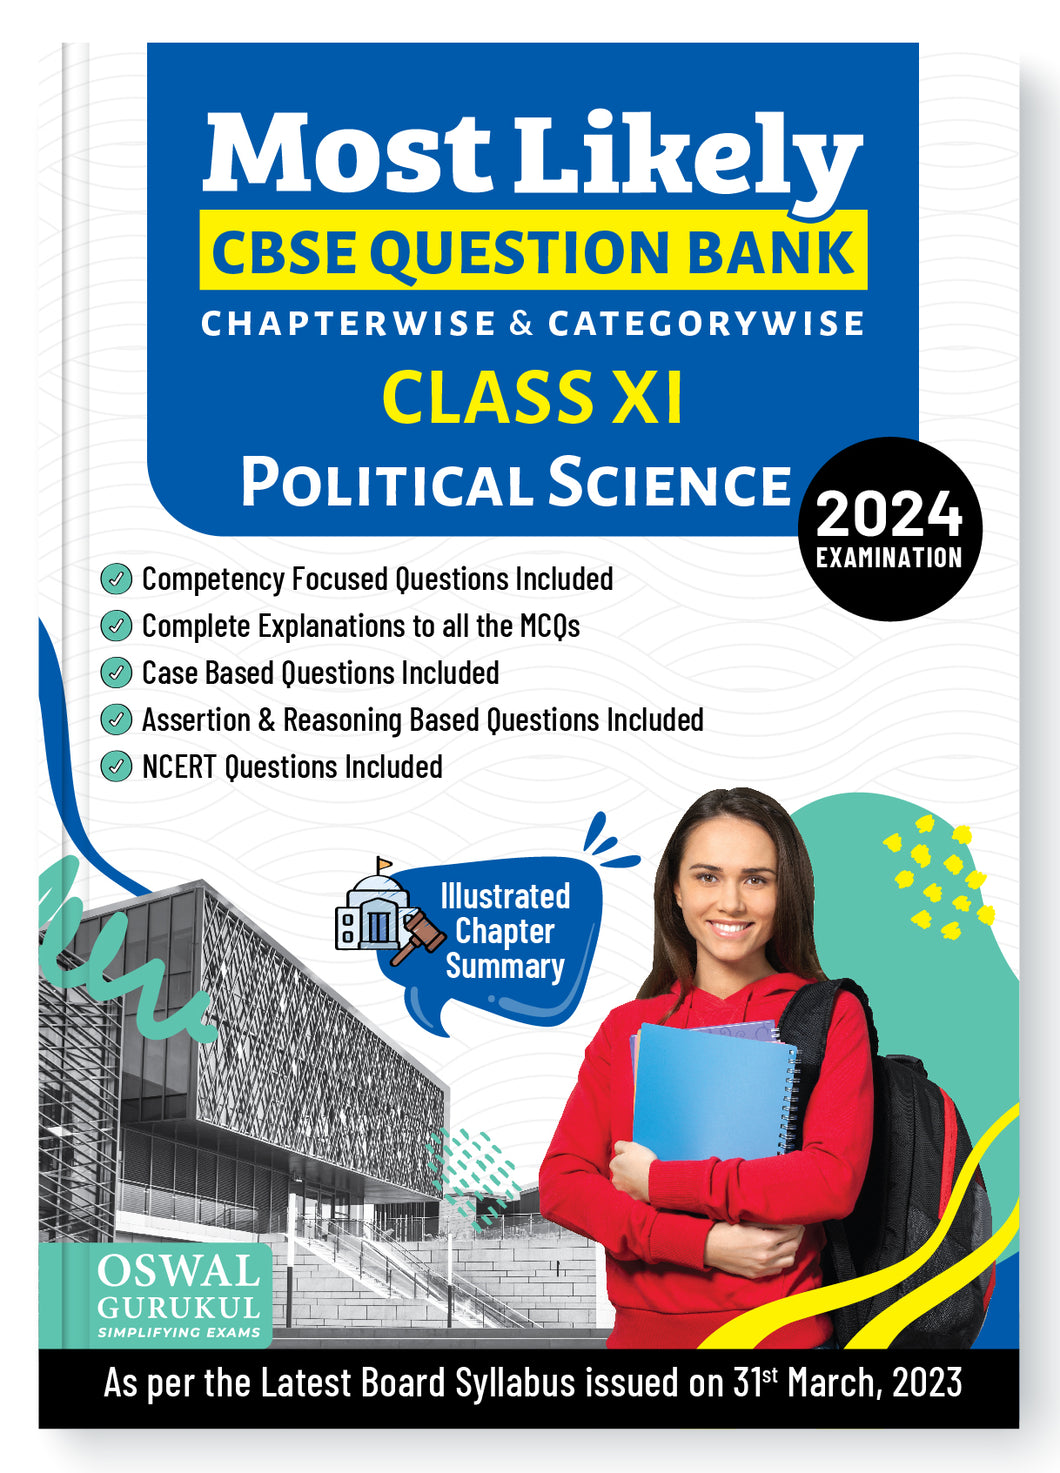 Oswal - Gurukul Political Science Most Likely CBSE Question Bank : Class 11 Exam 2024